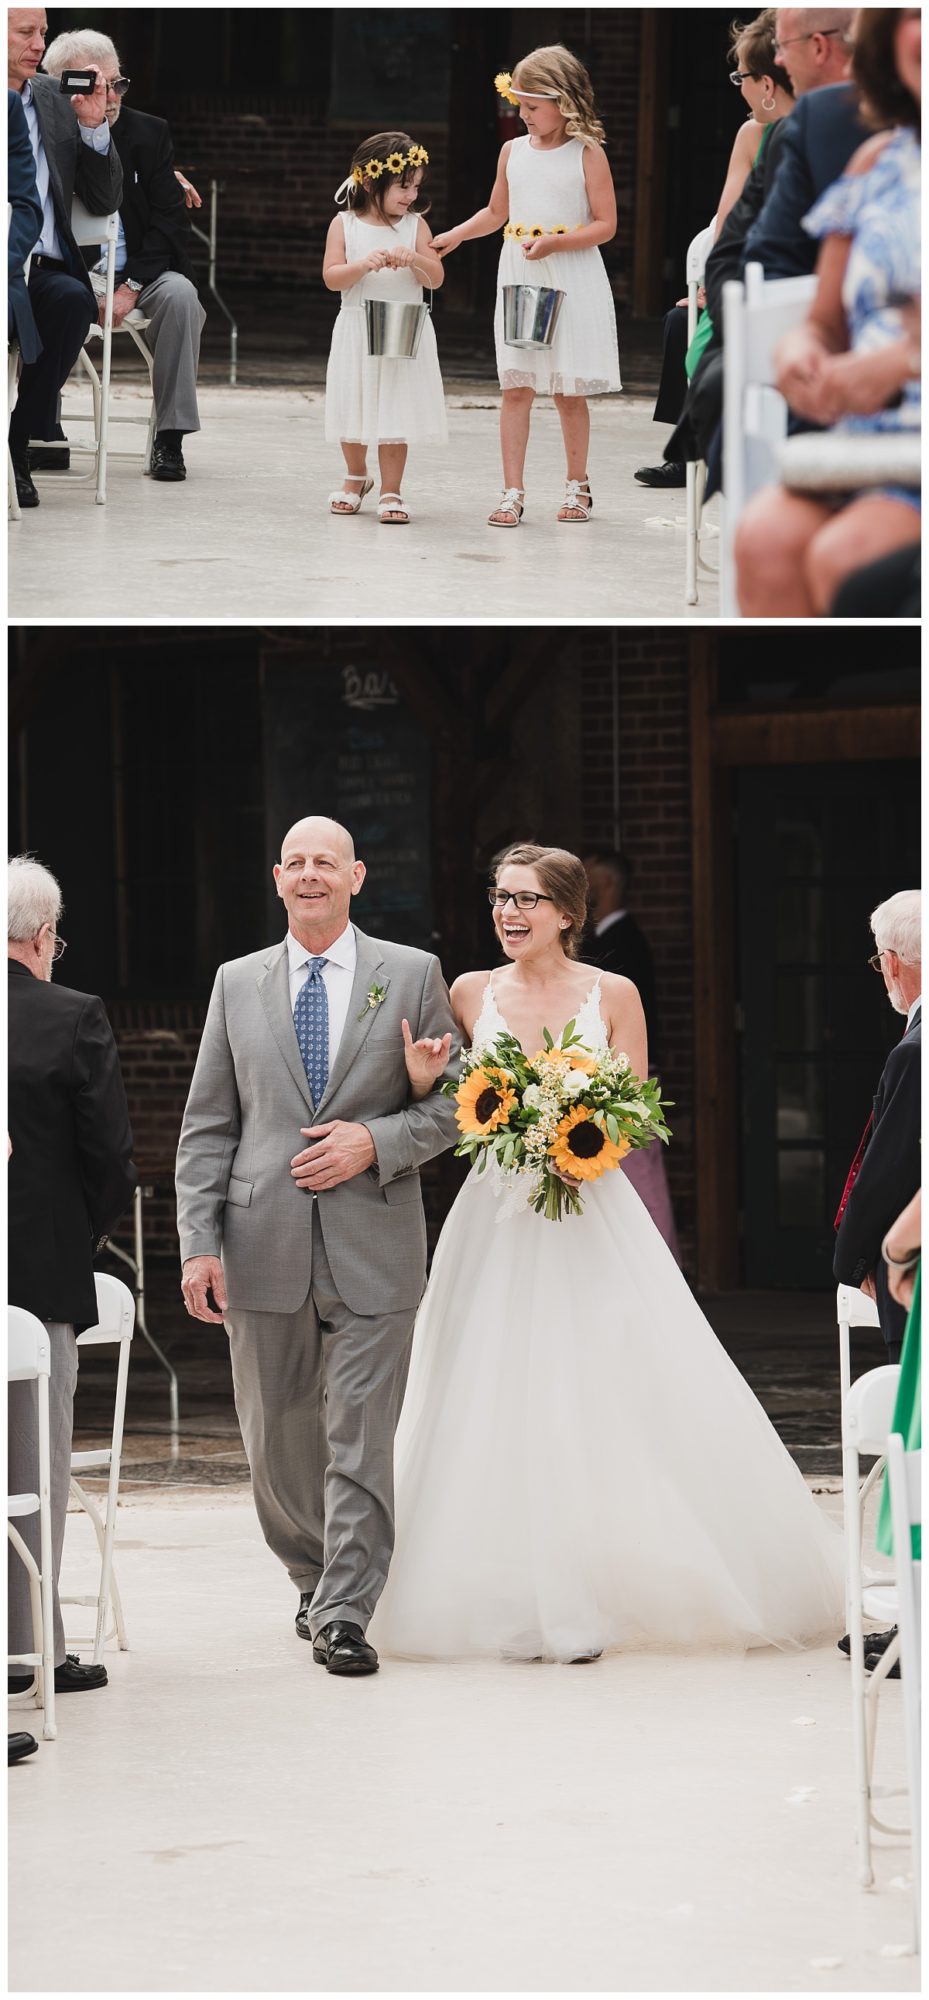 Top image of flower girls with sunflower crowns walking down the aisle at the rooftop ceremony at Jefferson Underground. | Bottom image of bride with father walking down the aisle, greeting guests with a smile and a wave.